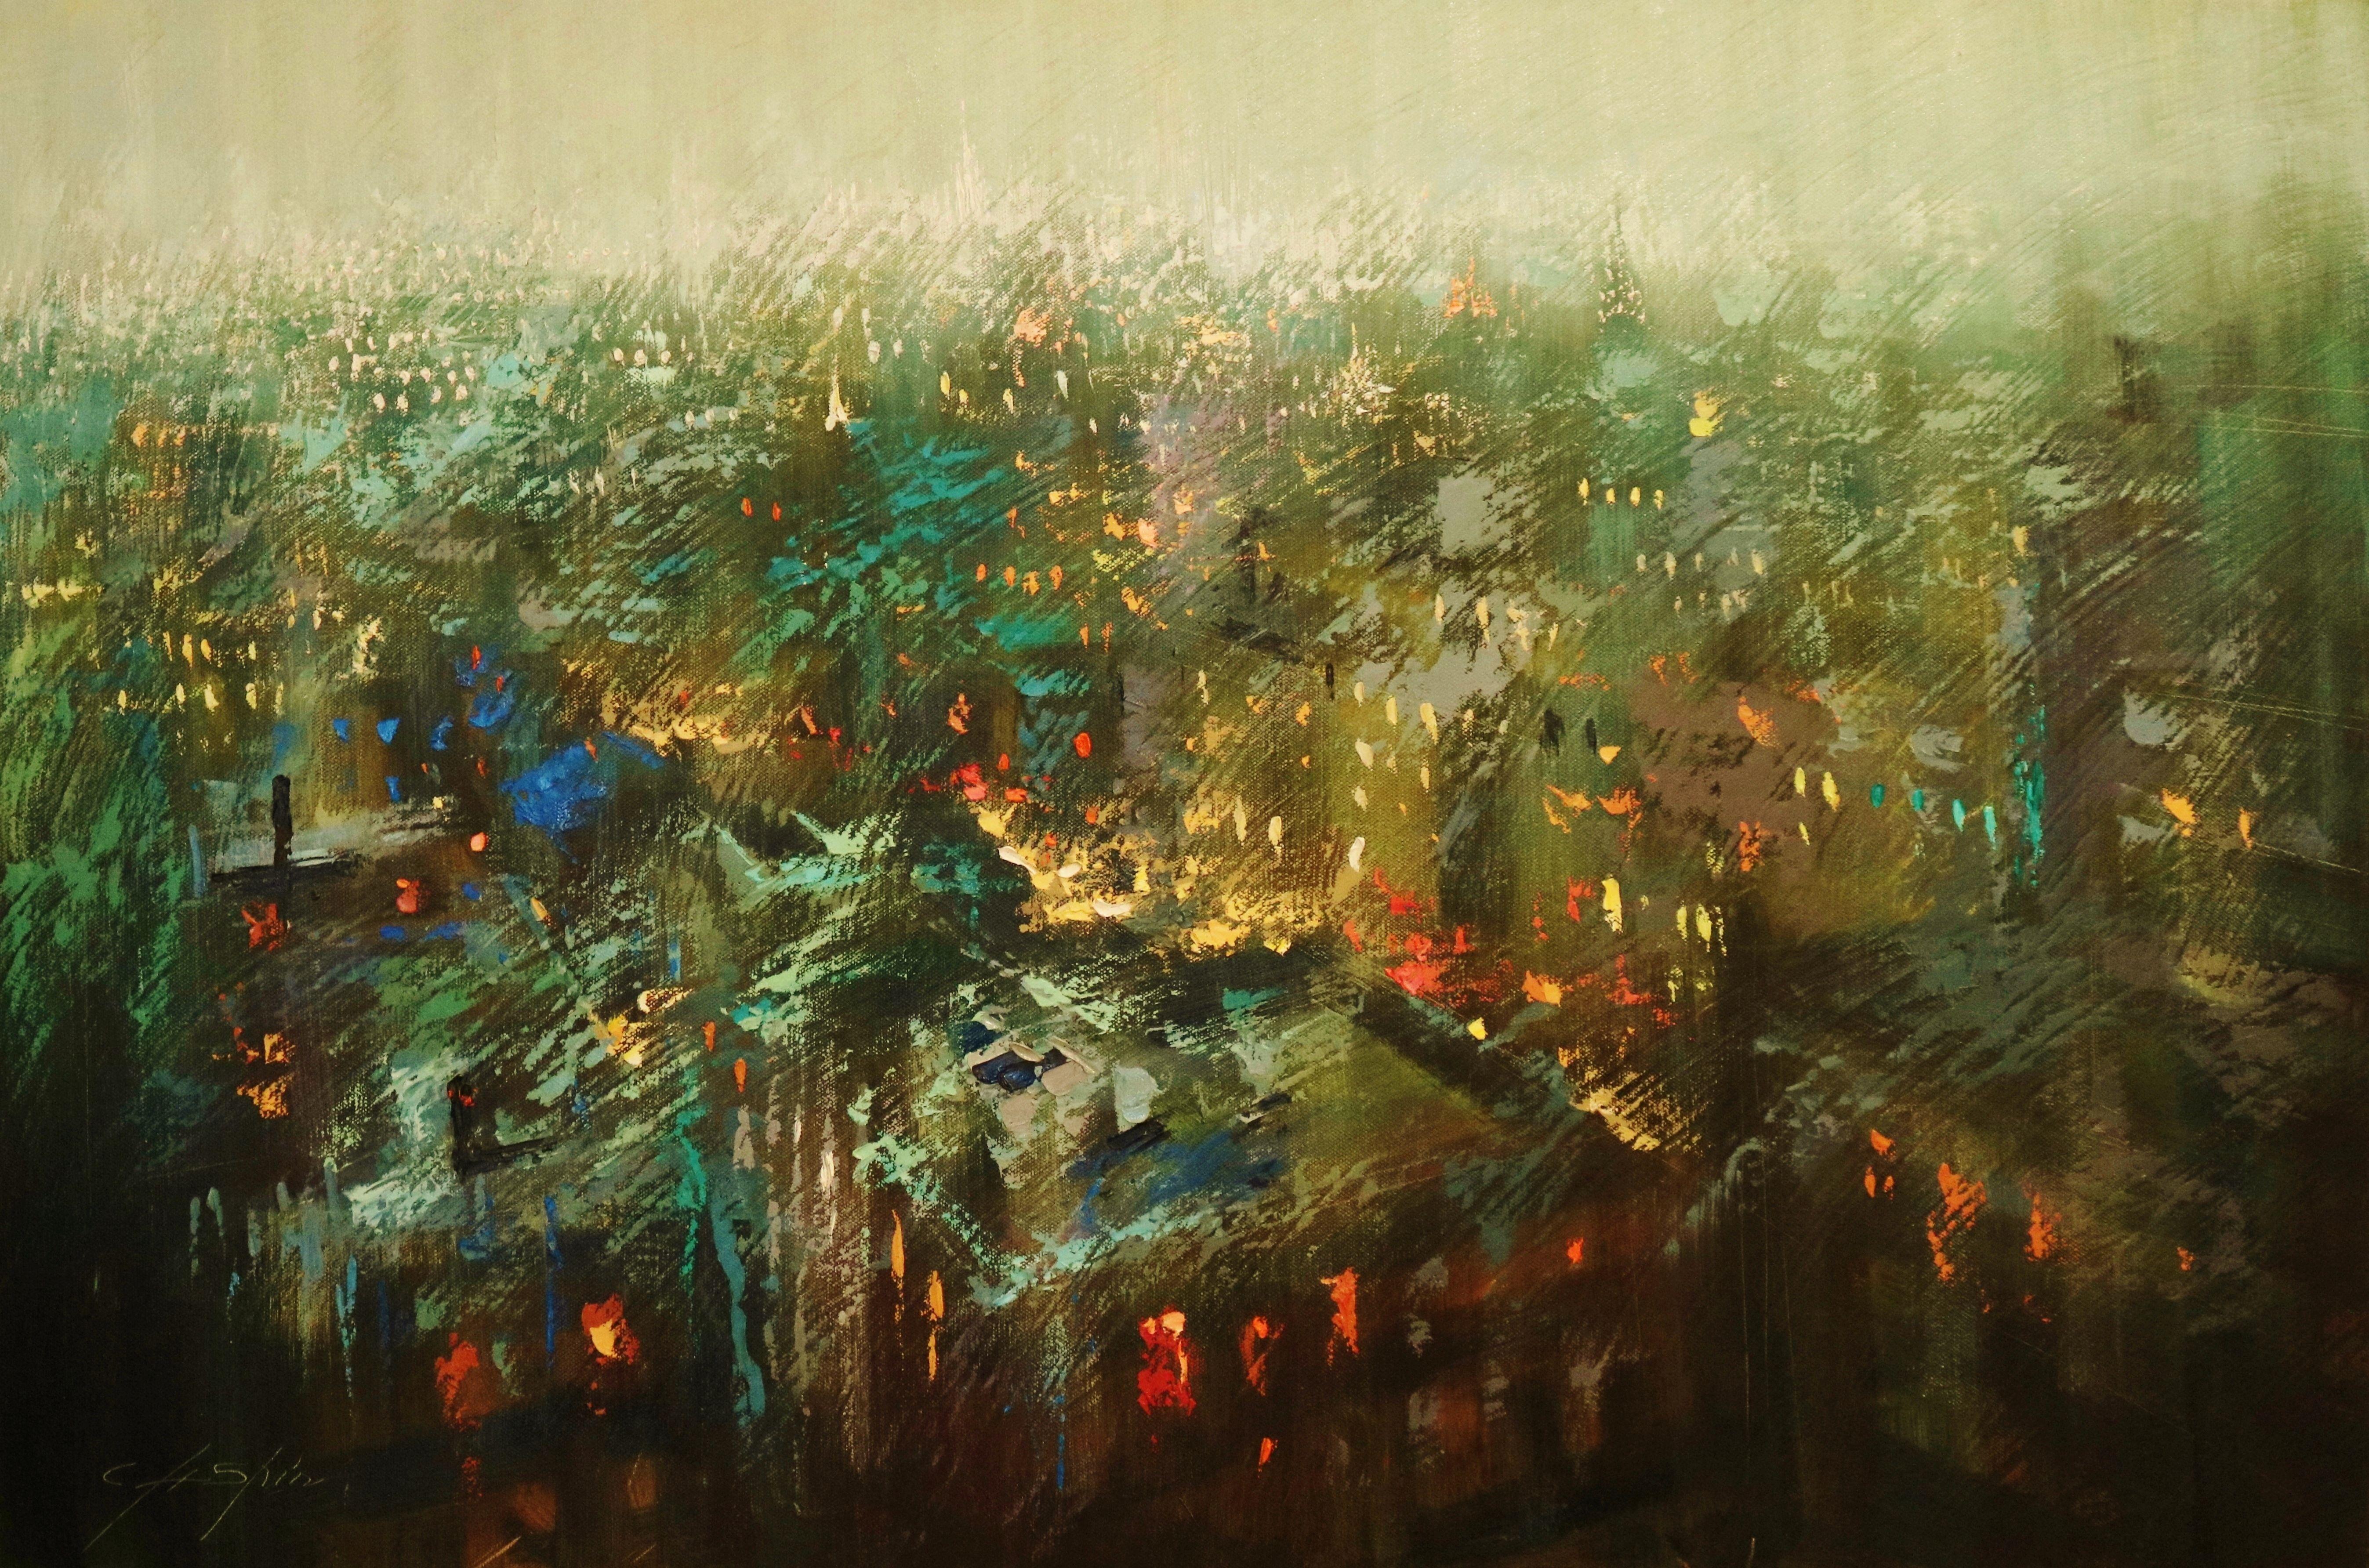 Painting: Oil on Canvas.    Painting: Oil on Canvas.    One of kind Original Painting    24 x 36 x 1.5 inches    Heavily Textured painting    New York is always been very interesting city and has  variety of element to work with, but most